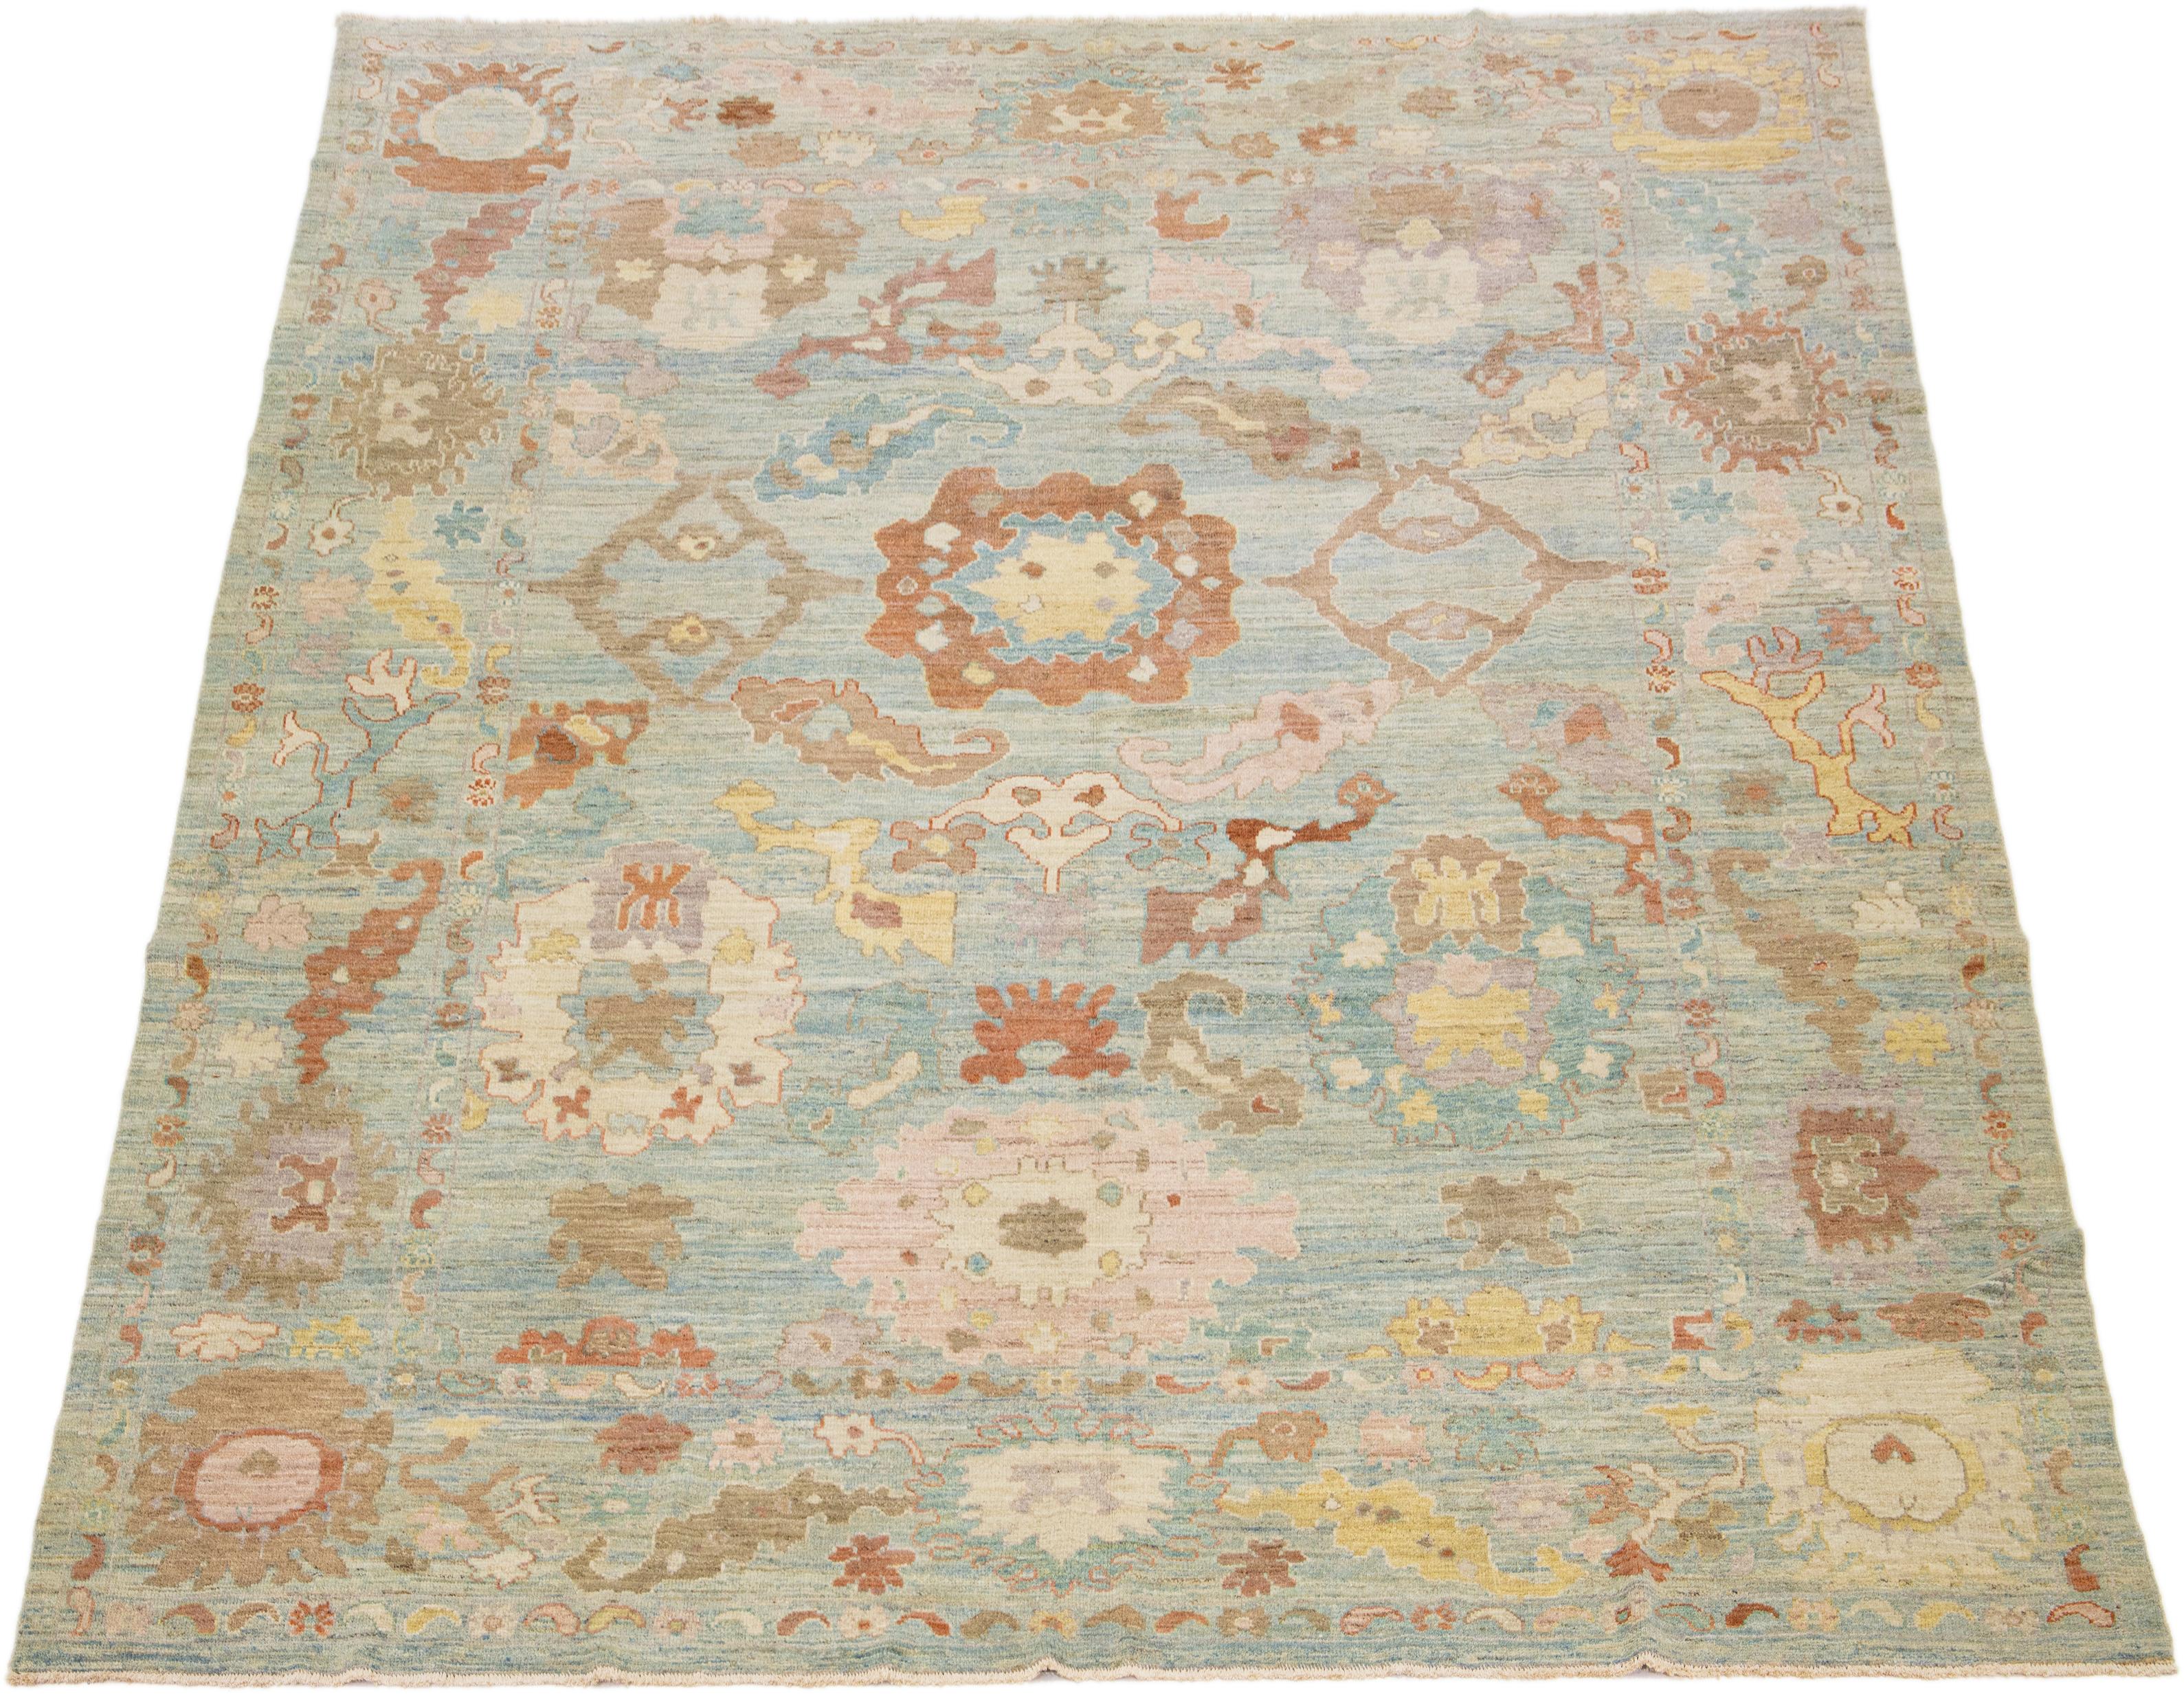 This modern reinterpretation of timeless Sultanabad design is beautifully manifested in an exquisitely hand-knotted wool rug, resplendent in its striking light blue shade. An intricate border delineates its all-over floral embroidery, embellished